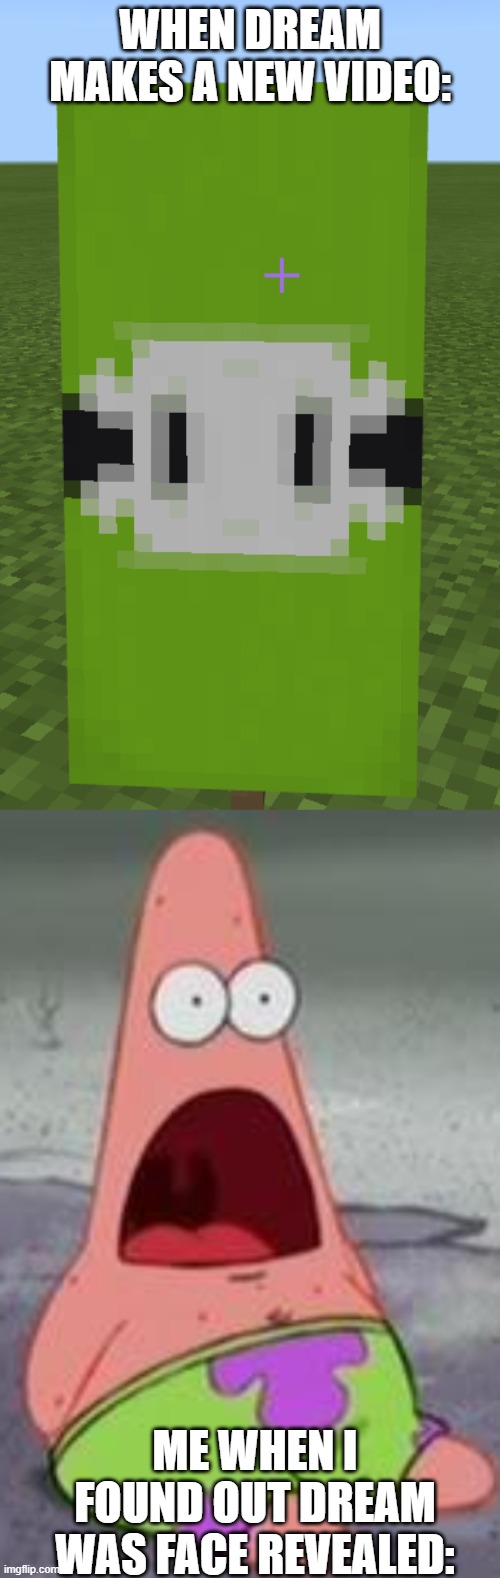 Dream is real | WHEN DREAM MAKES A NEW VIDEO:; ME WHEN I FOUND OUT DREAM WAS FACE REVEALED: | image tagged in dream in minecraft,suprised patrick | made w/ Imgflip meme maker